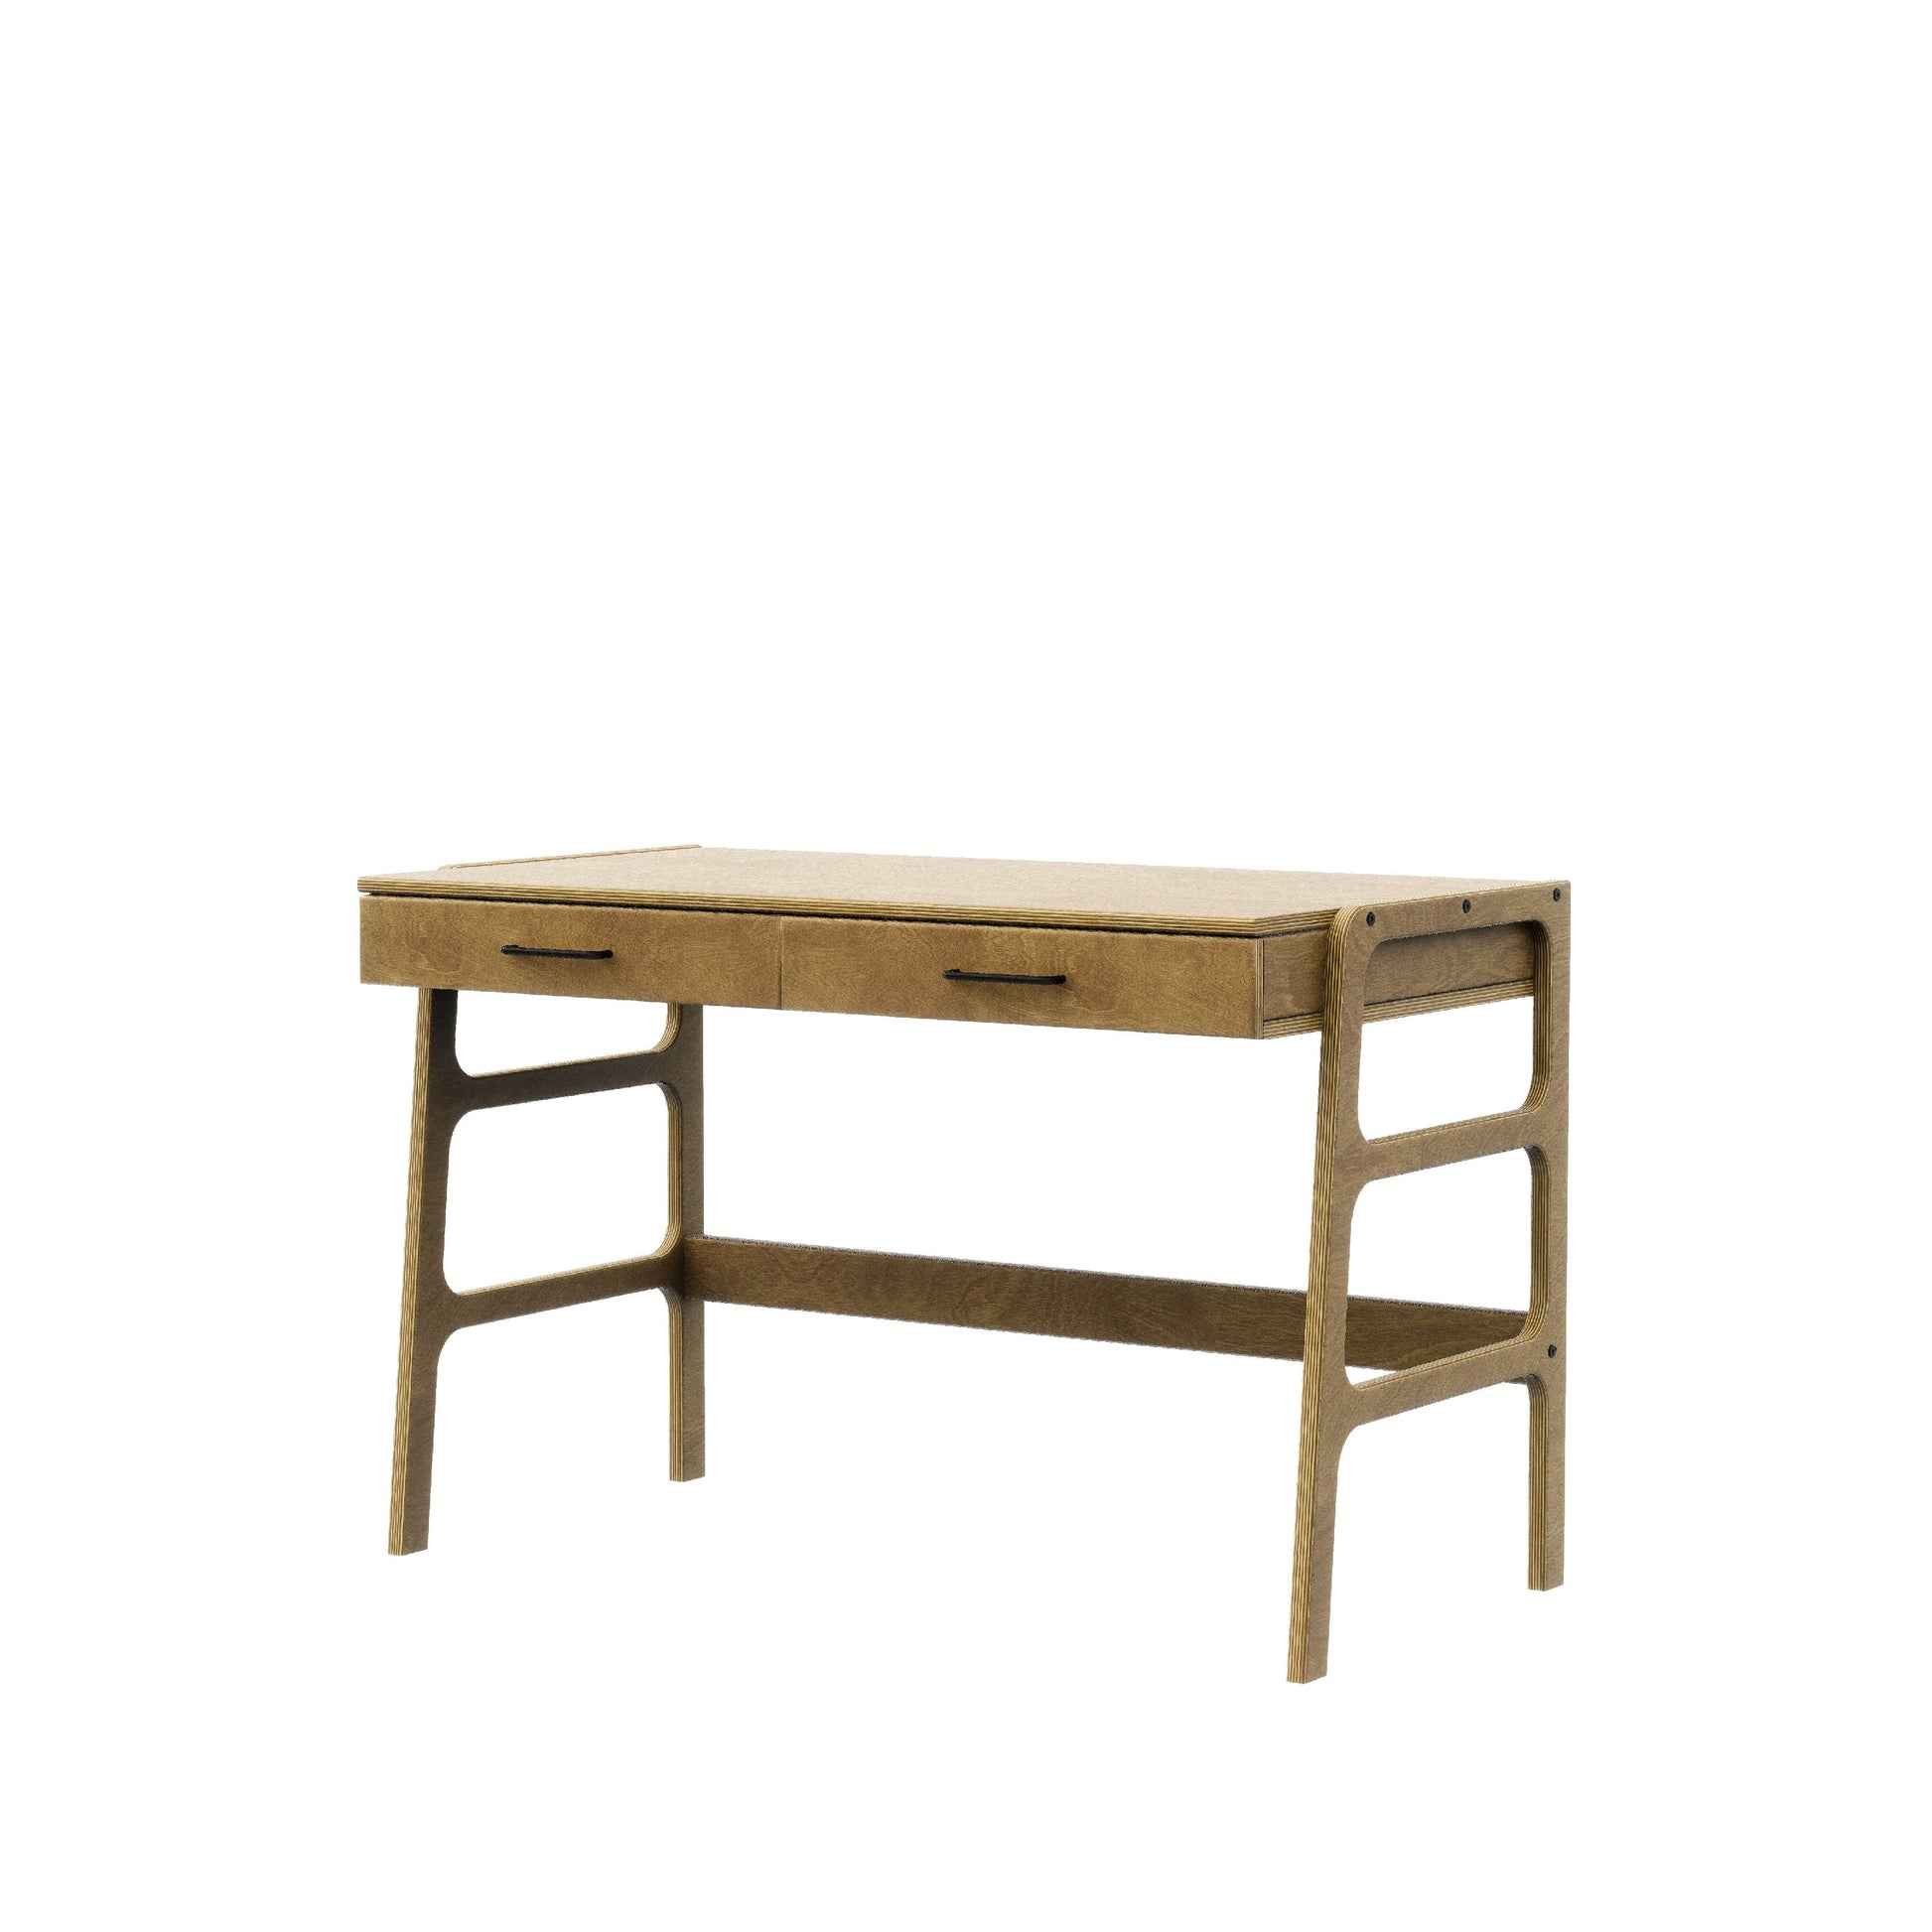 wooden-desk-with-drawers-mid-century-modern